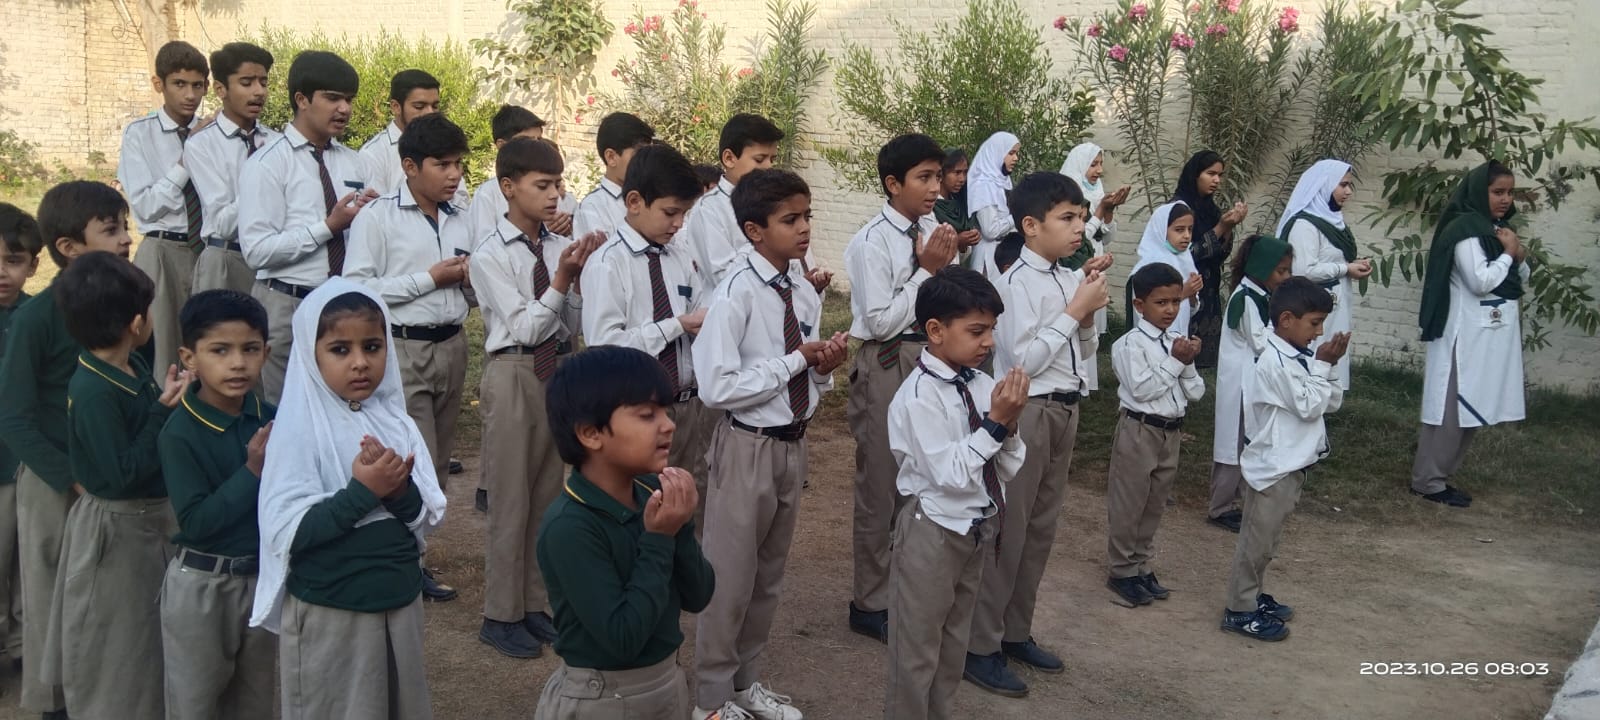 Alhamdulillah – Some random pictures from morning assemblies at Forces School Mianwali Campus